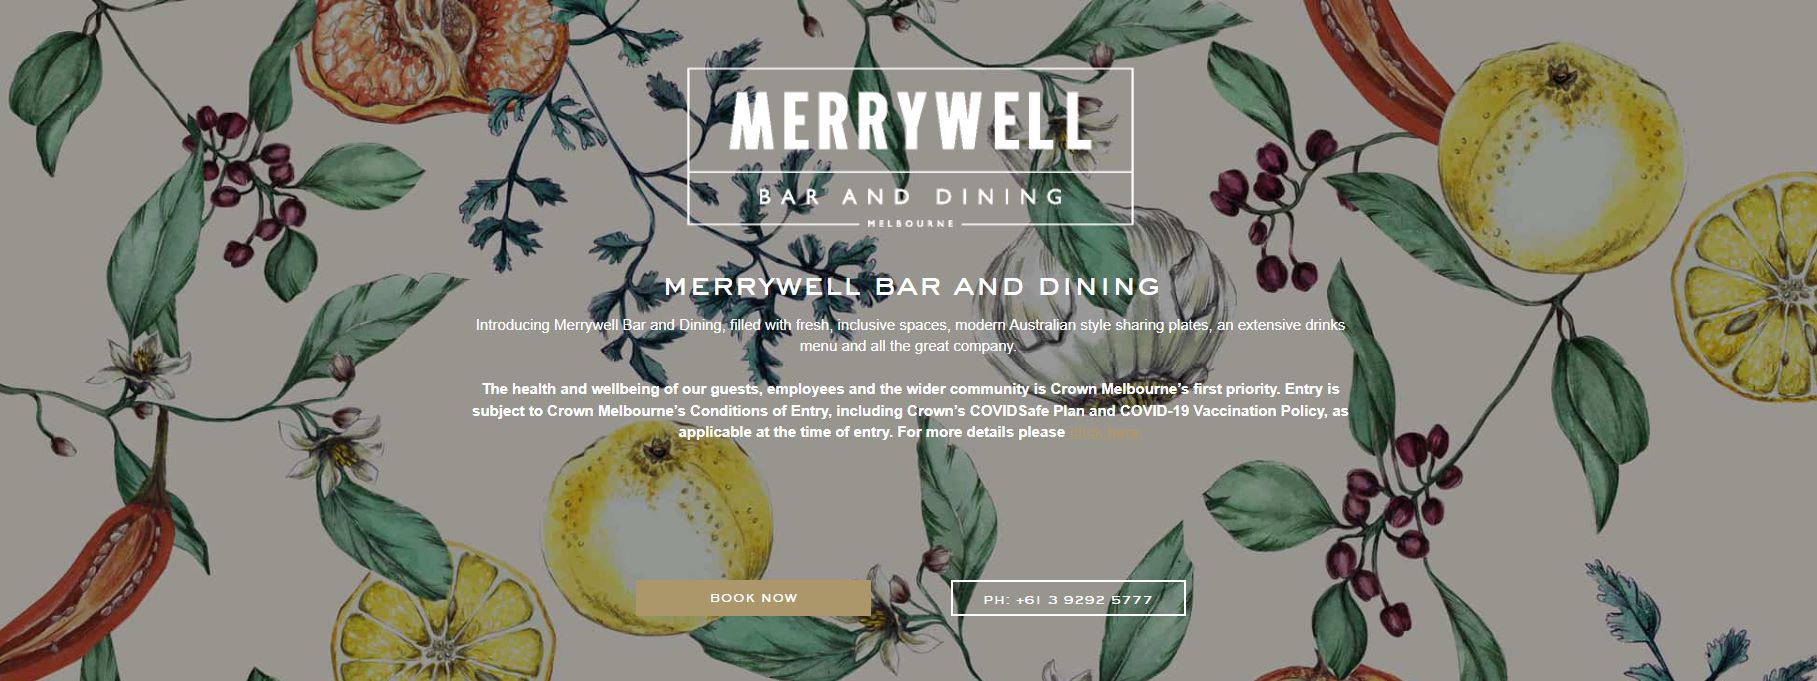 merrywell bar and dining